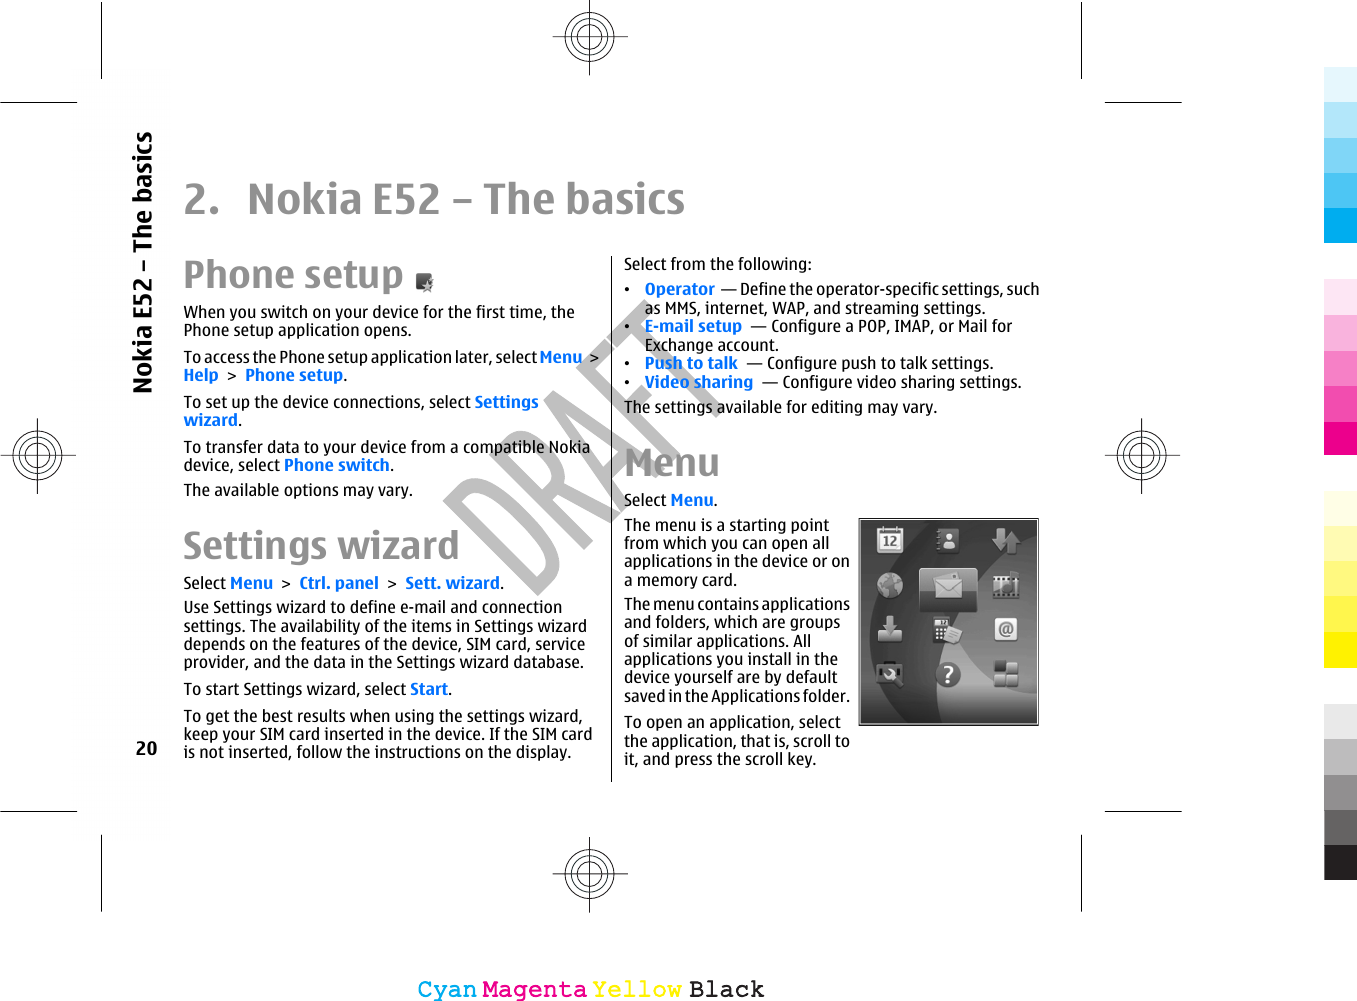 2.  Nokia E52 – The basicsPhone setupWhen you switch on your device for the first time, thePhone setup application opens.To access the Phone setup application later, select Menu &gt;Help &gt; Phone setup.To set up the device connections, select Settingswizard.To transfer data to your device from a compatible Nokiadevice, select Phone switch.The available options may vary.Settings wizardSelect Menu &gt; Ctrl. panel &gt; Sett. wizard.Use Settings wizard to define e-mail and connectionsettings. The availability of the items in Settings wizarddepends on the features of the device, SIM card, serviceprovider, and the data in the Settings wizard database.To start Settings wizard, select Start.To get the best results when using the settings wizard,keep your SIM card inserted in the device. If the SIM cardis not inserted, follow the instructions on the display.Select from the following:•Operator  — Define the operator-specific settings, suchas MMS, internet, WAP, and streaming settings.•E-mail setup  — Configure a POP, IMAP, or Mail forExchange account.•Push to talk  — Configure push to talk settings.•Video sharing  — Configure video sharing settings.The settings available for editing may vary.MenuSelect Menu.The menu is a starting pointfrom which you can open allapplications in the device or ona memory card.The menu contains applicationsand folders, which are groupsof similar applications. Allapplications you install in thedevice yourself are by defaultsaved in the Applications folder.To open an application, selectthe application, that is, scroll toit, and press the scroll key.20Nokia E52 – The basicsCyanCyanMagentaMagentaYellowYellowBlackBlack